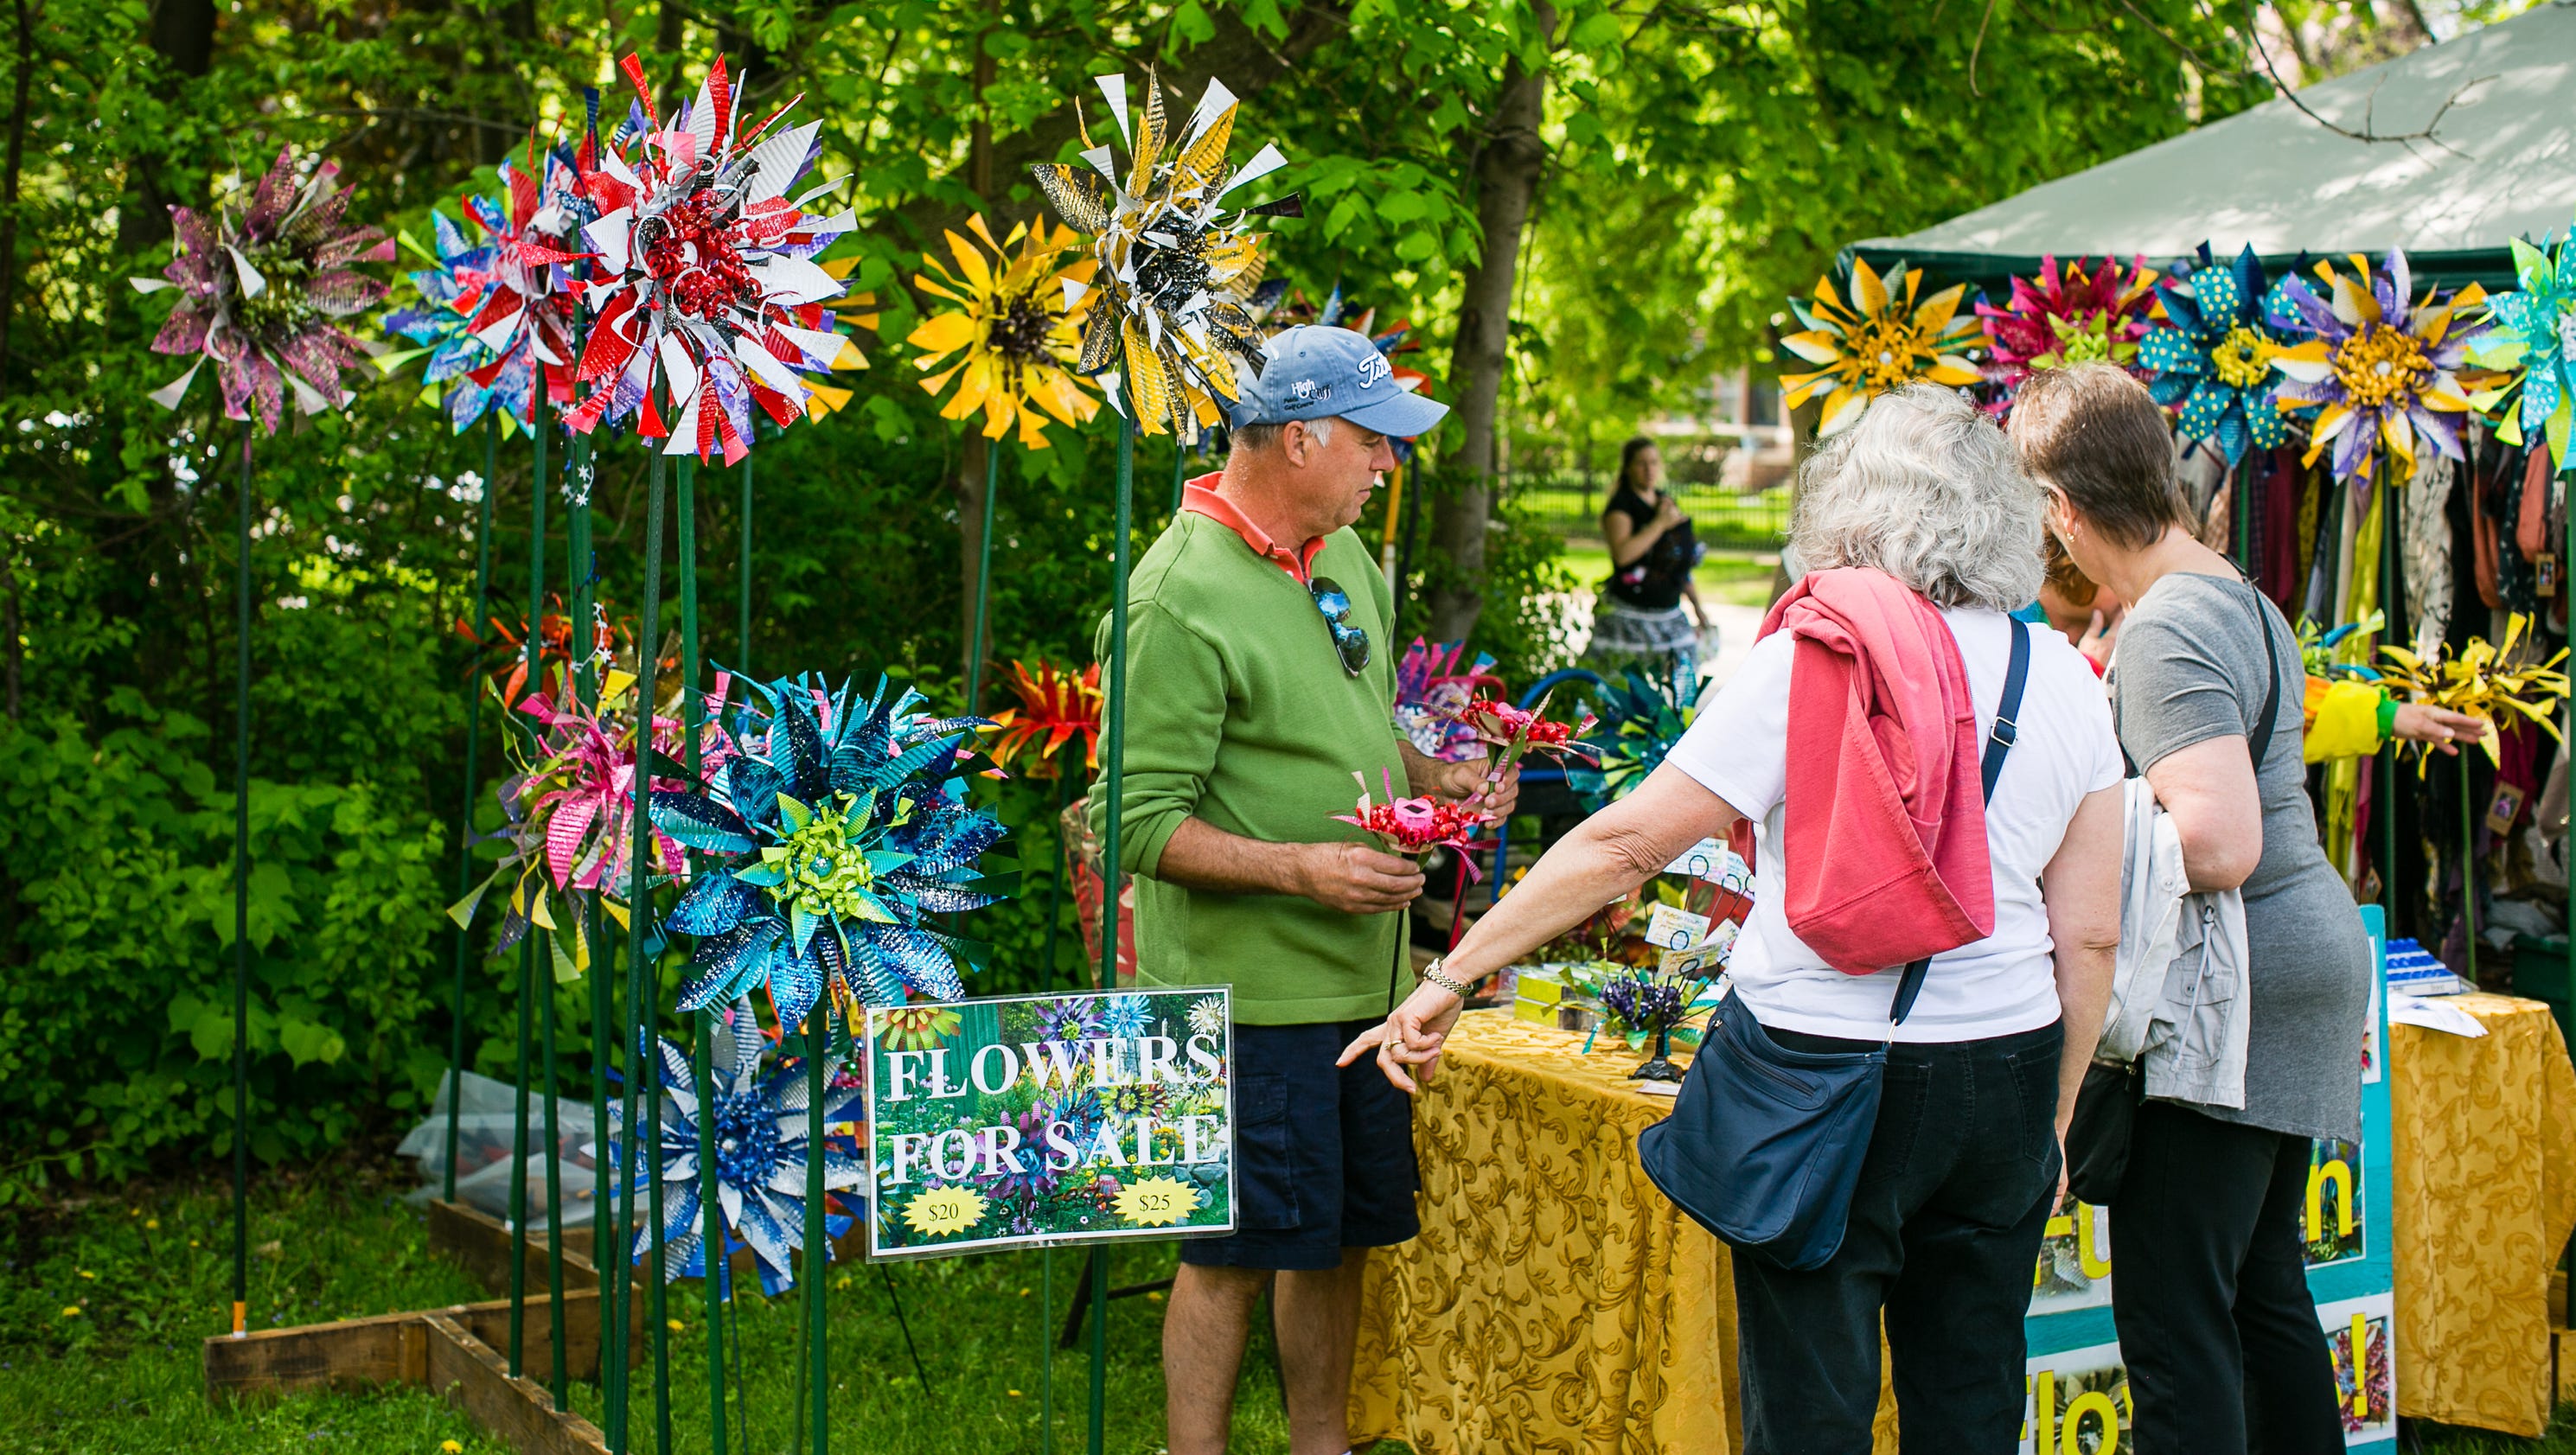 Paine Art Center and Gardens plans Faire on the Green on July 9 - The Oshkosh Northwestern